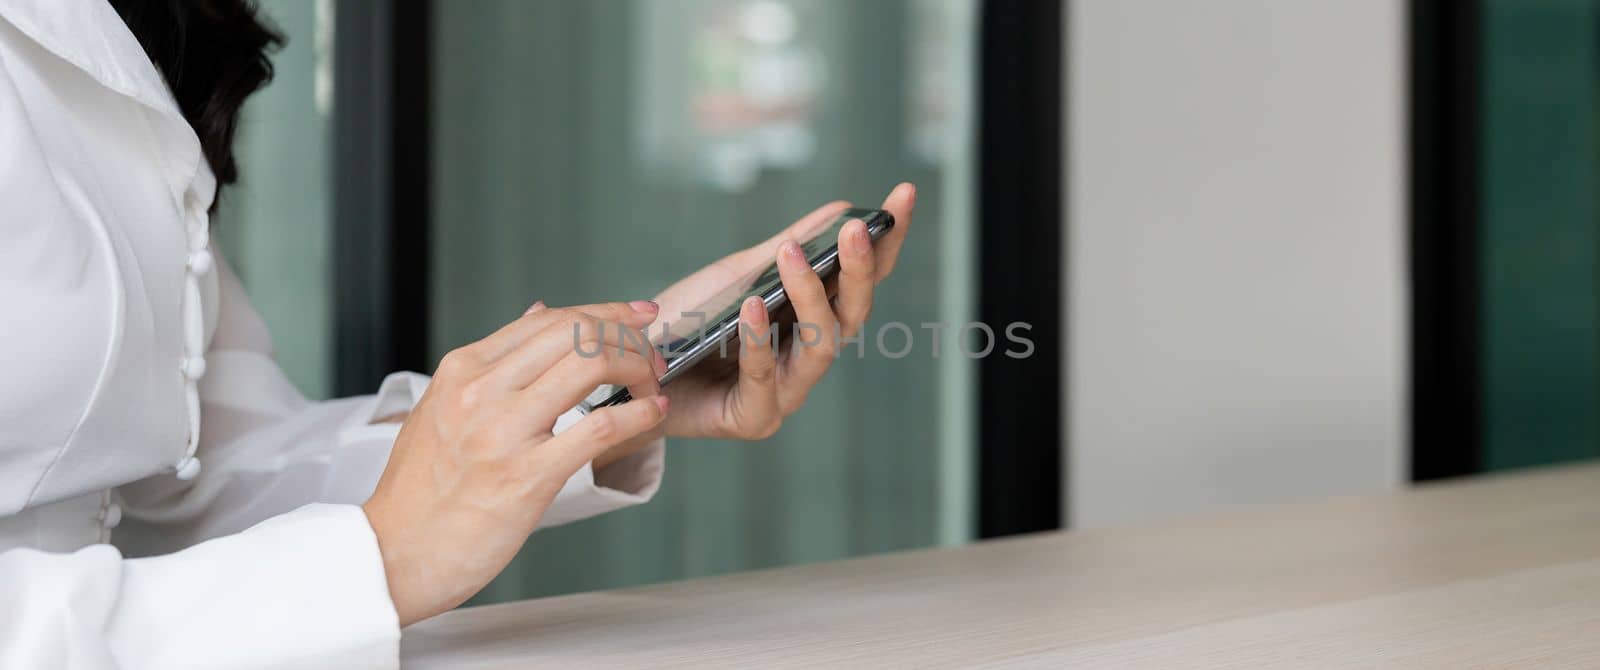 Woman with a finger on the screen using a mobile phone in the office.